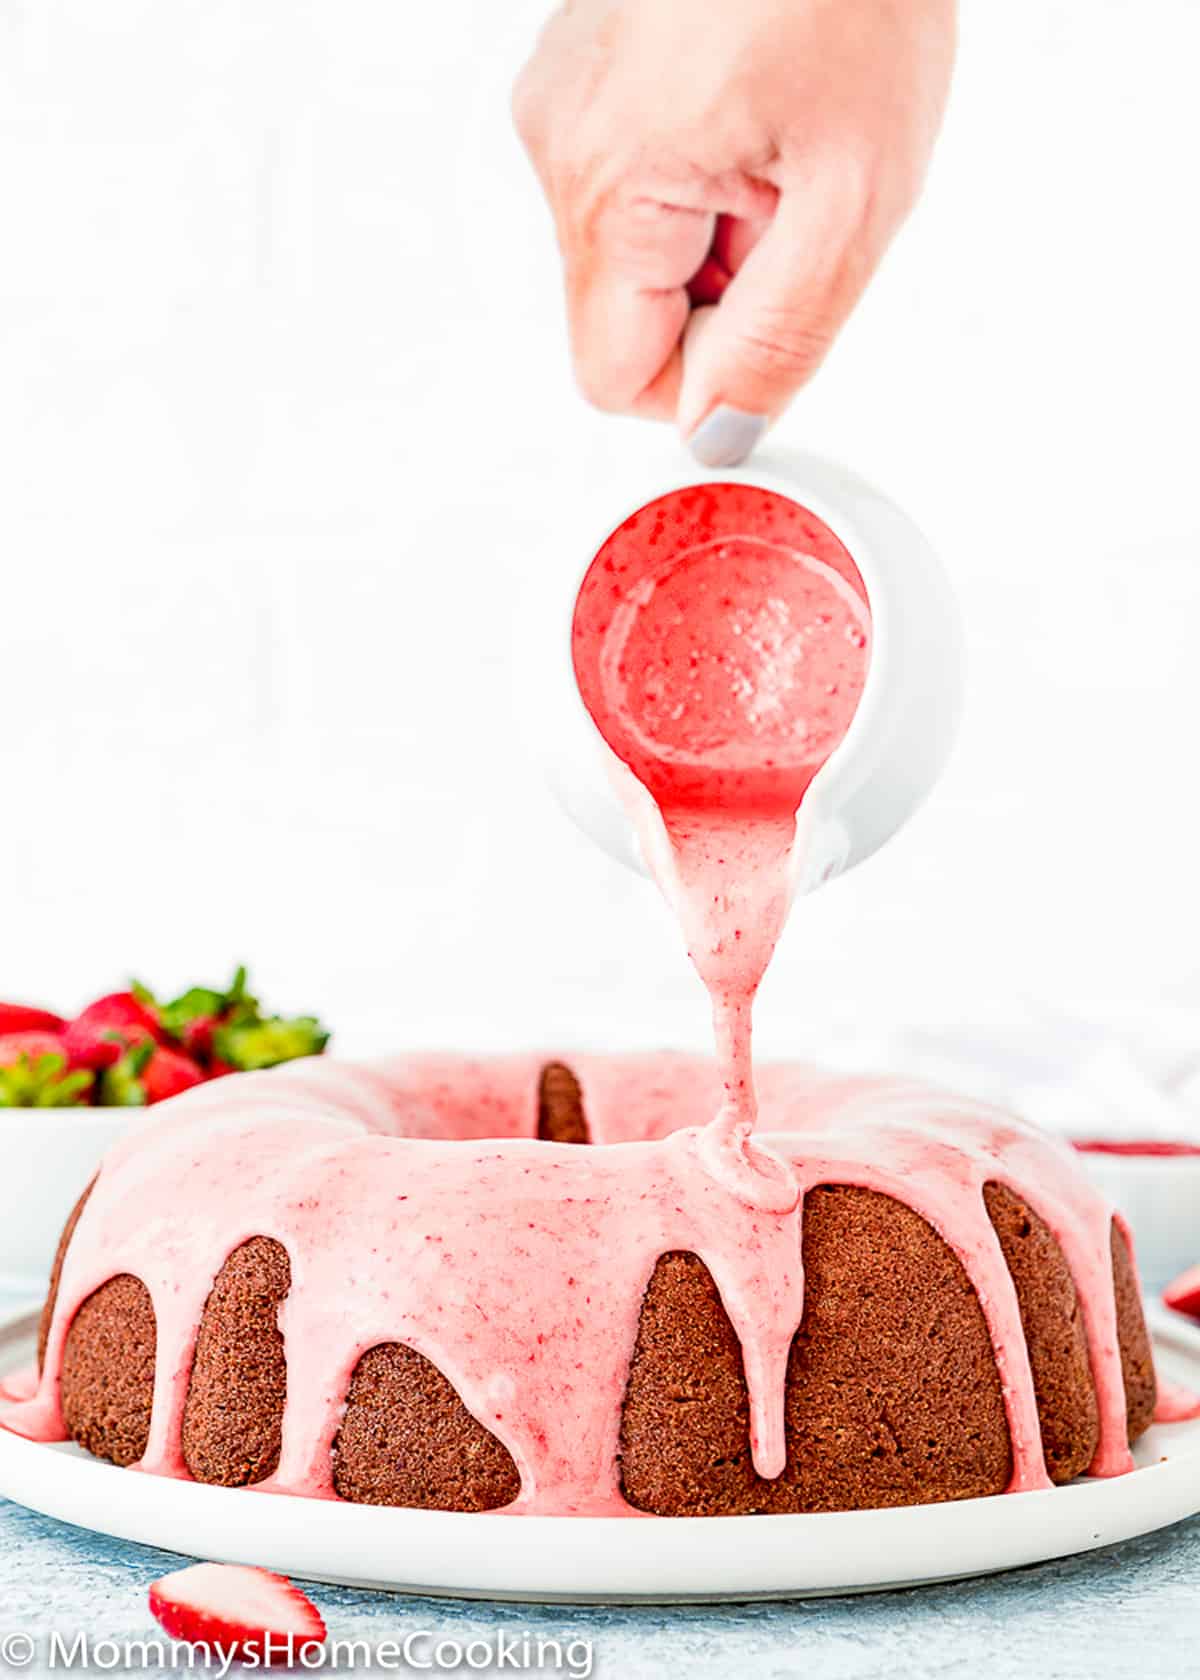 a hand pouring strawberry glaze over an Eggless Homemade Strawberry Bundt Cake on serving plate.